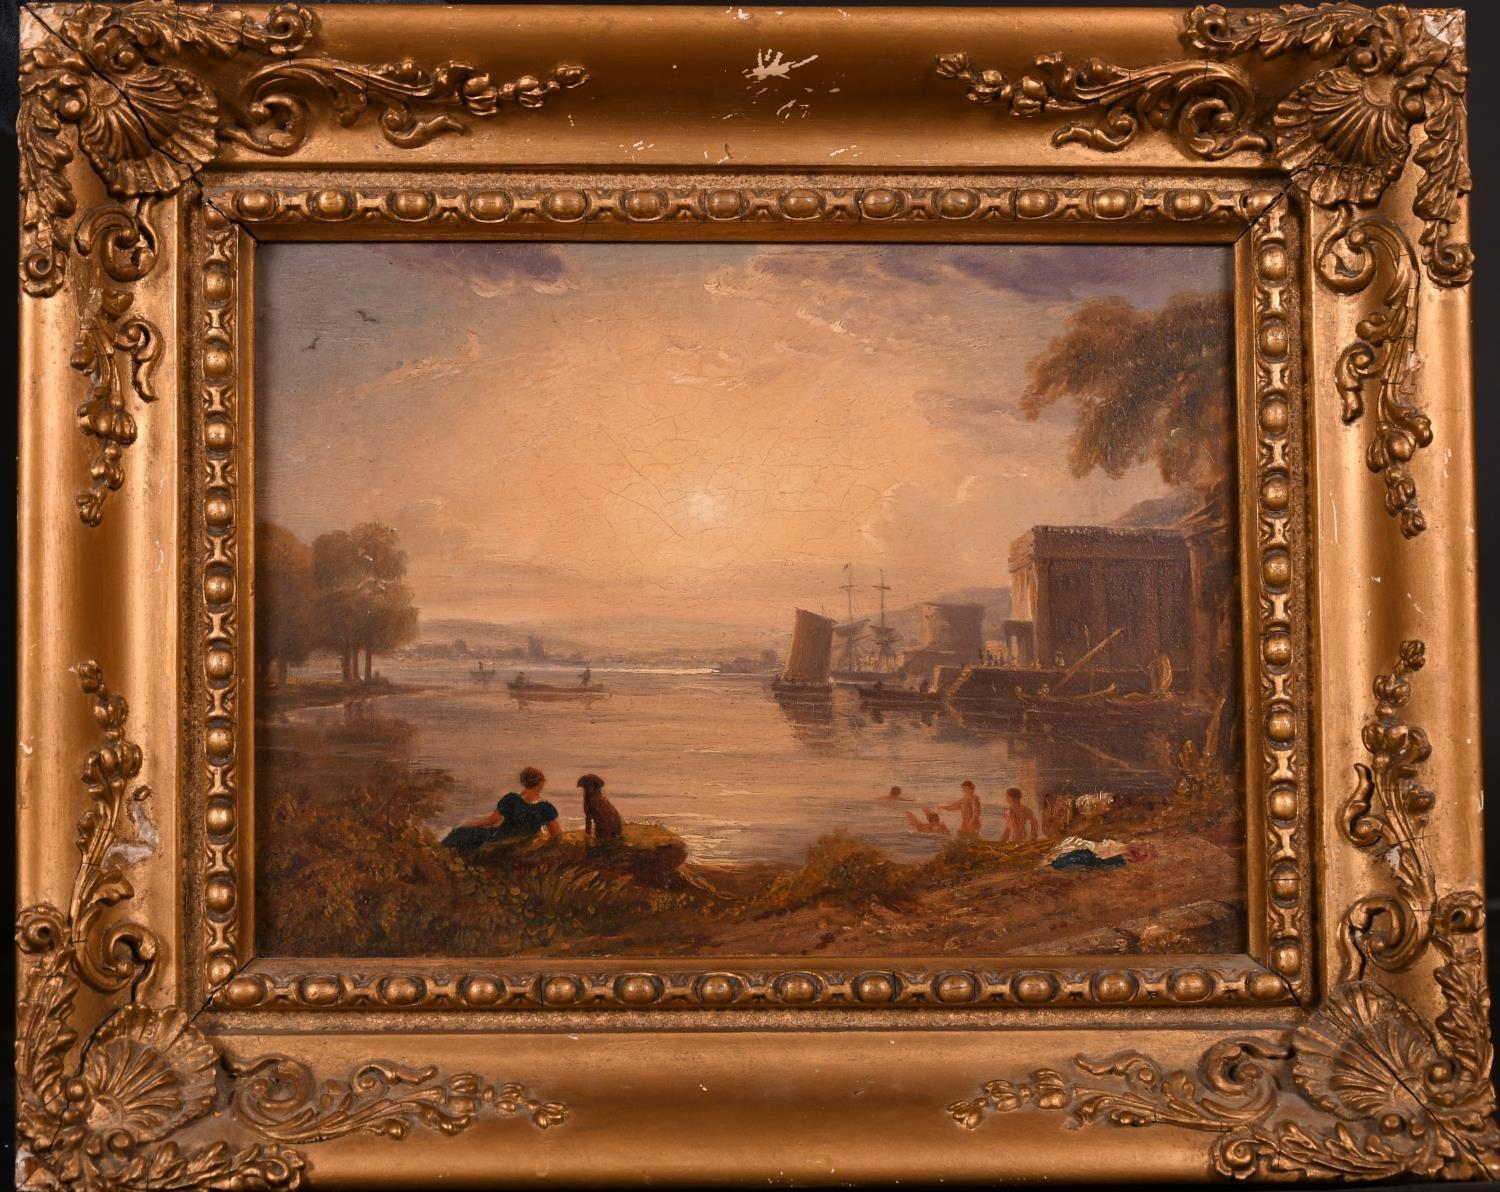 19th CENTURY ENGLISH OIL PAINTING - BATHERS CLASSICAL PORT LANDSCAPE AT SUNSET - Painting by Samuel Colman